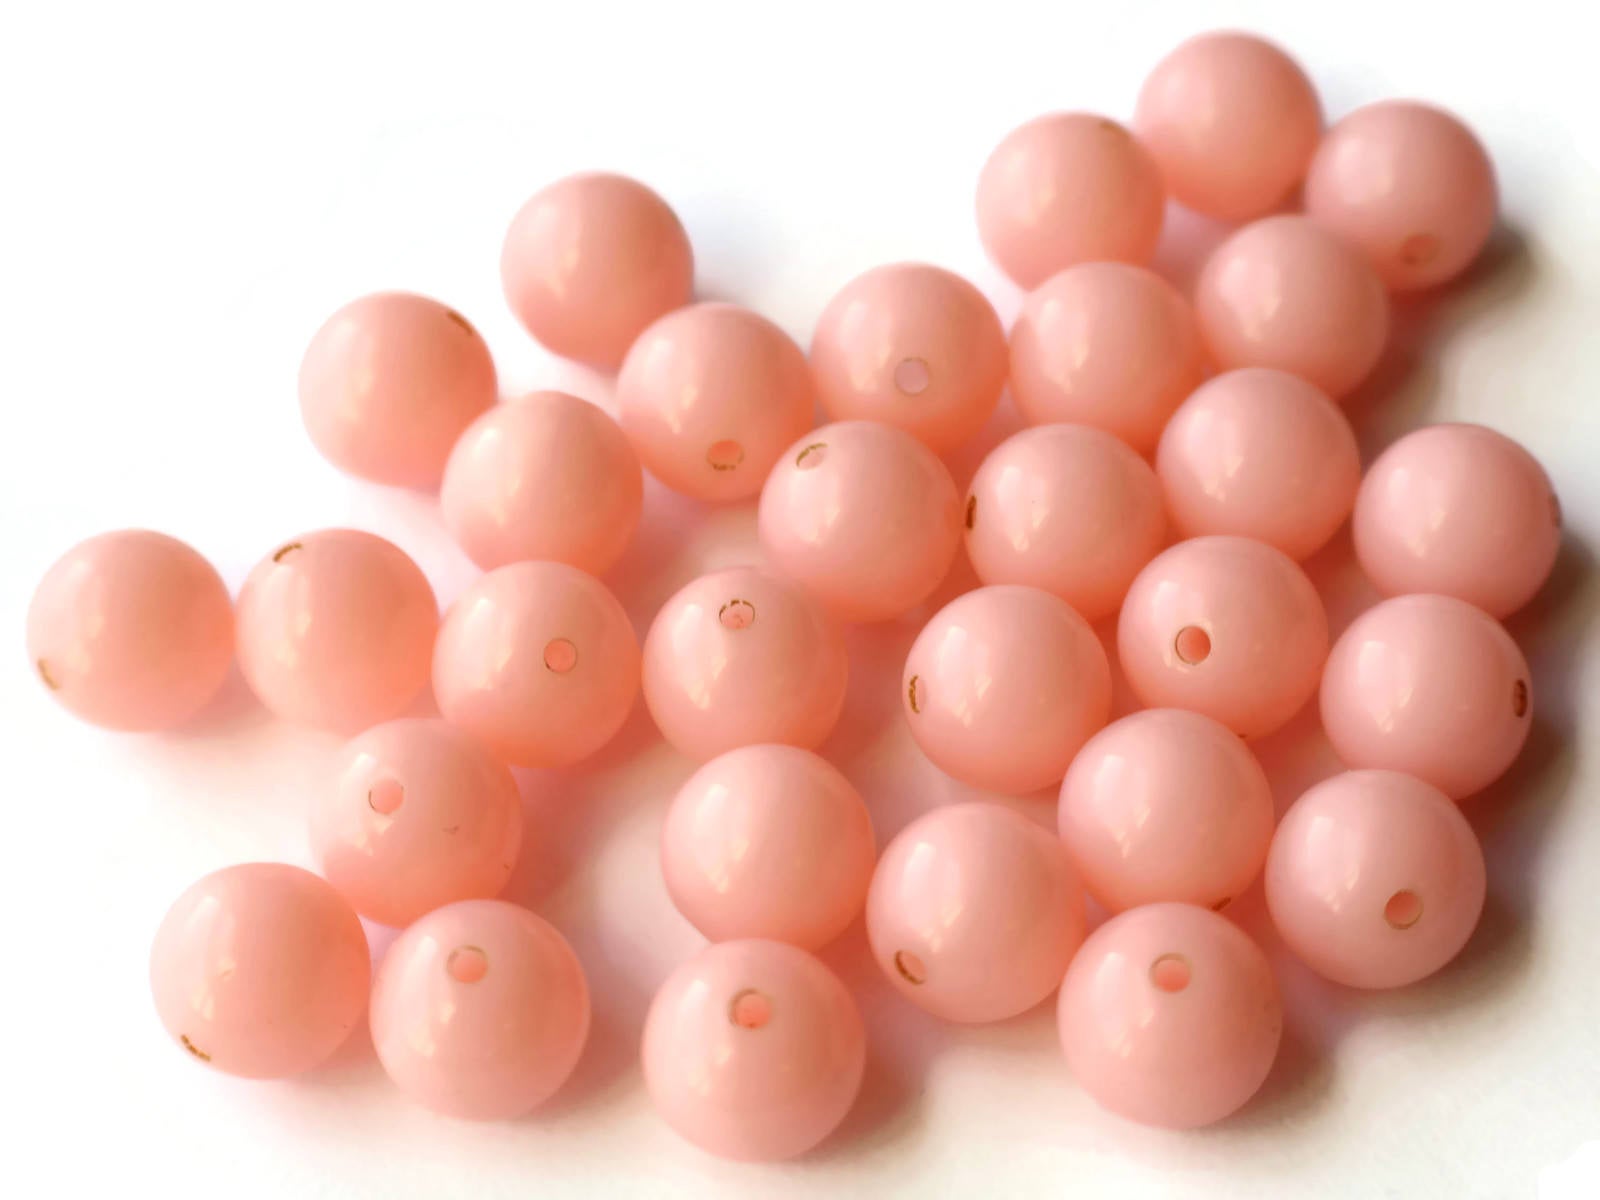 30 9mm Vintage Lucite Round Pink Beads Loose Beads by Smileyboy | Michaels